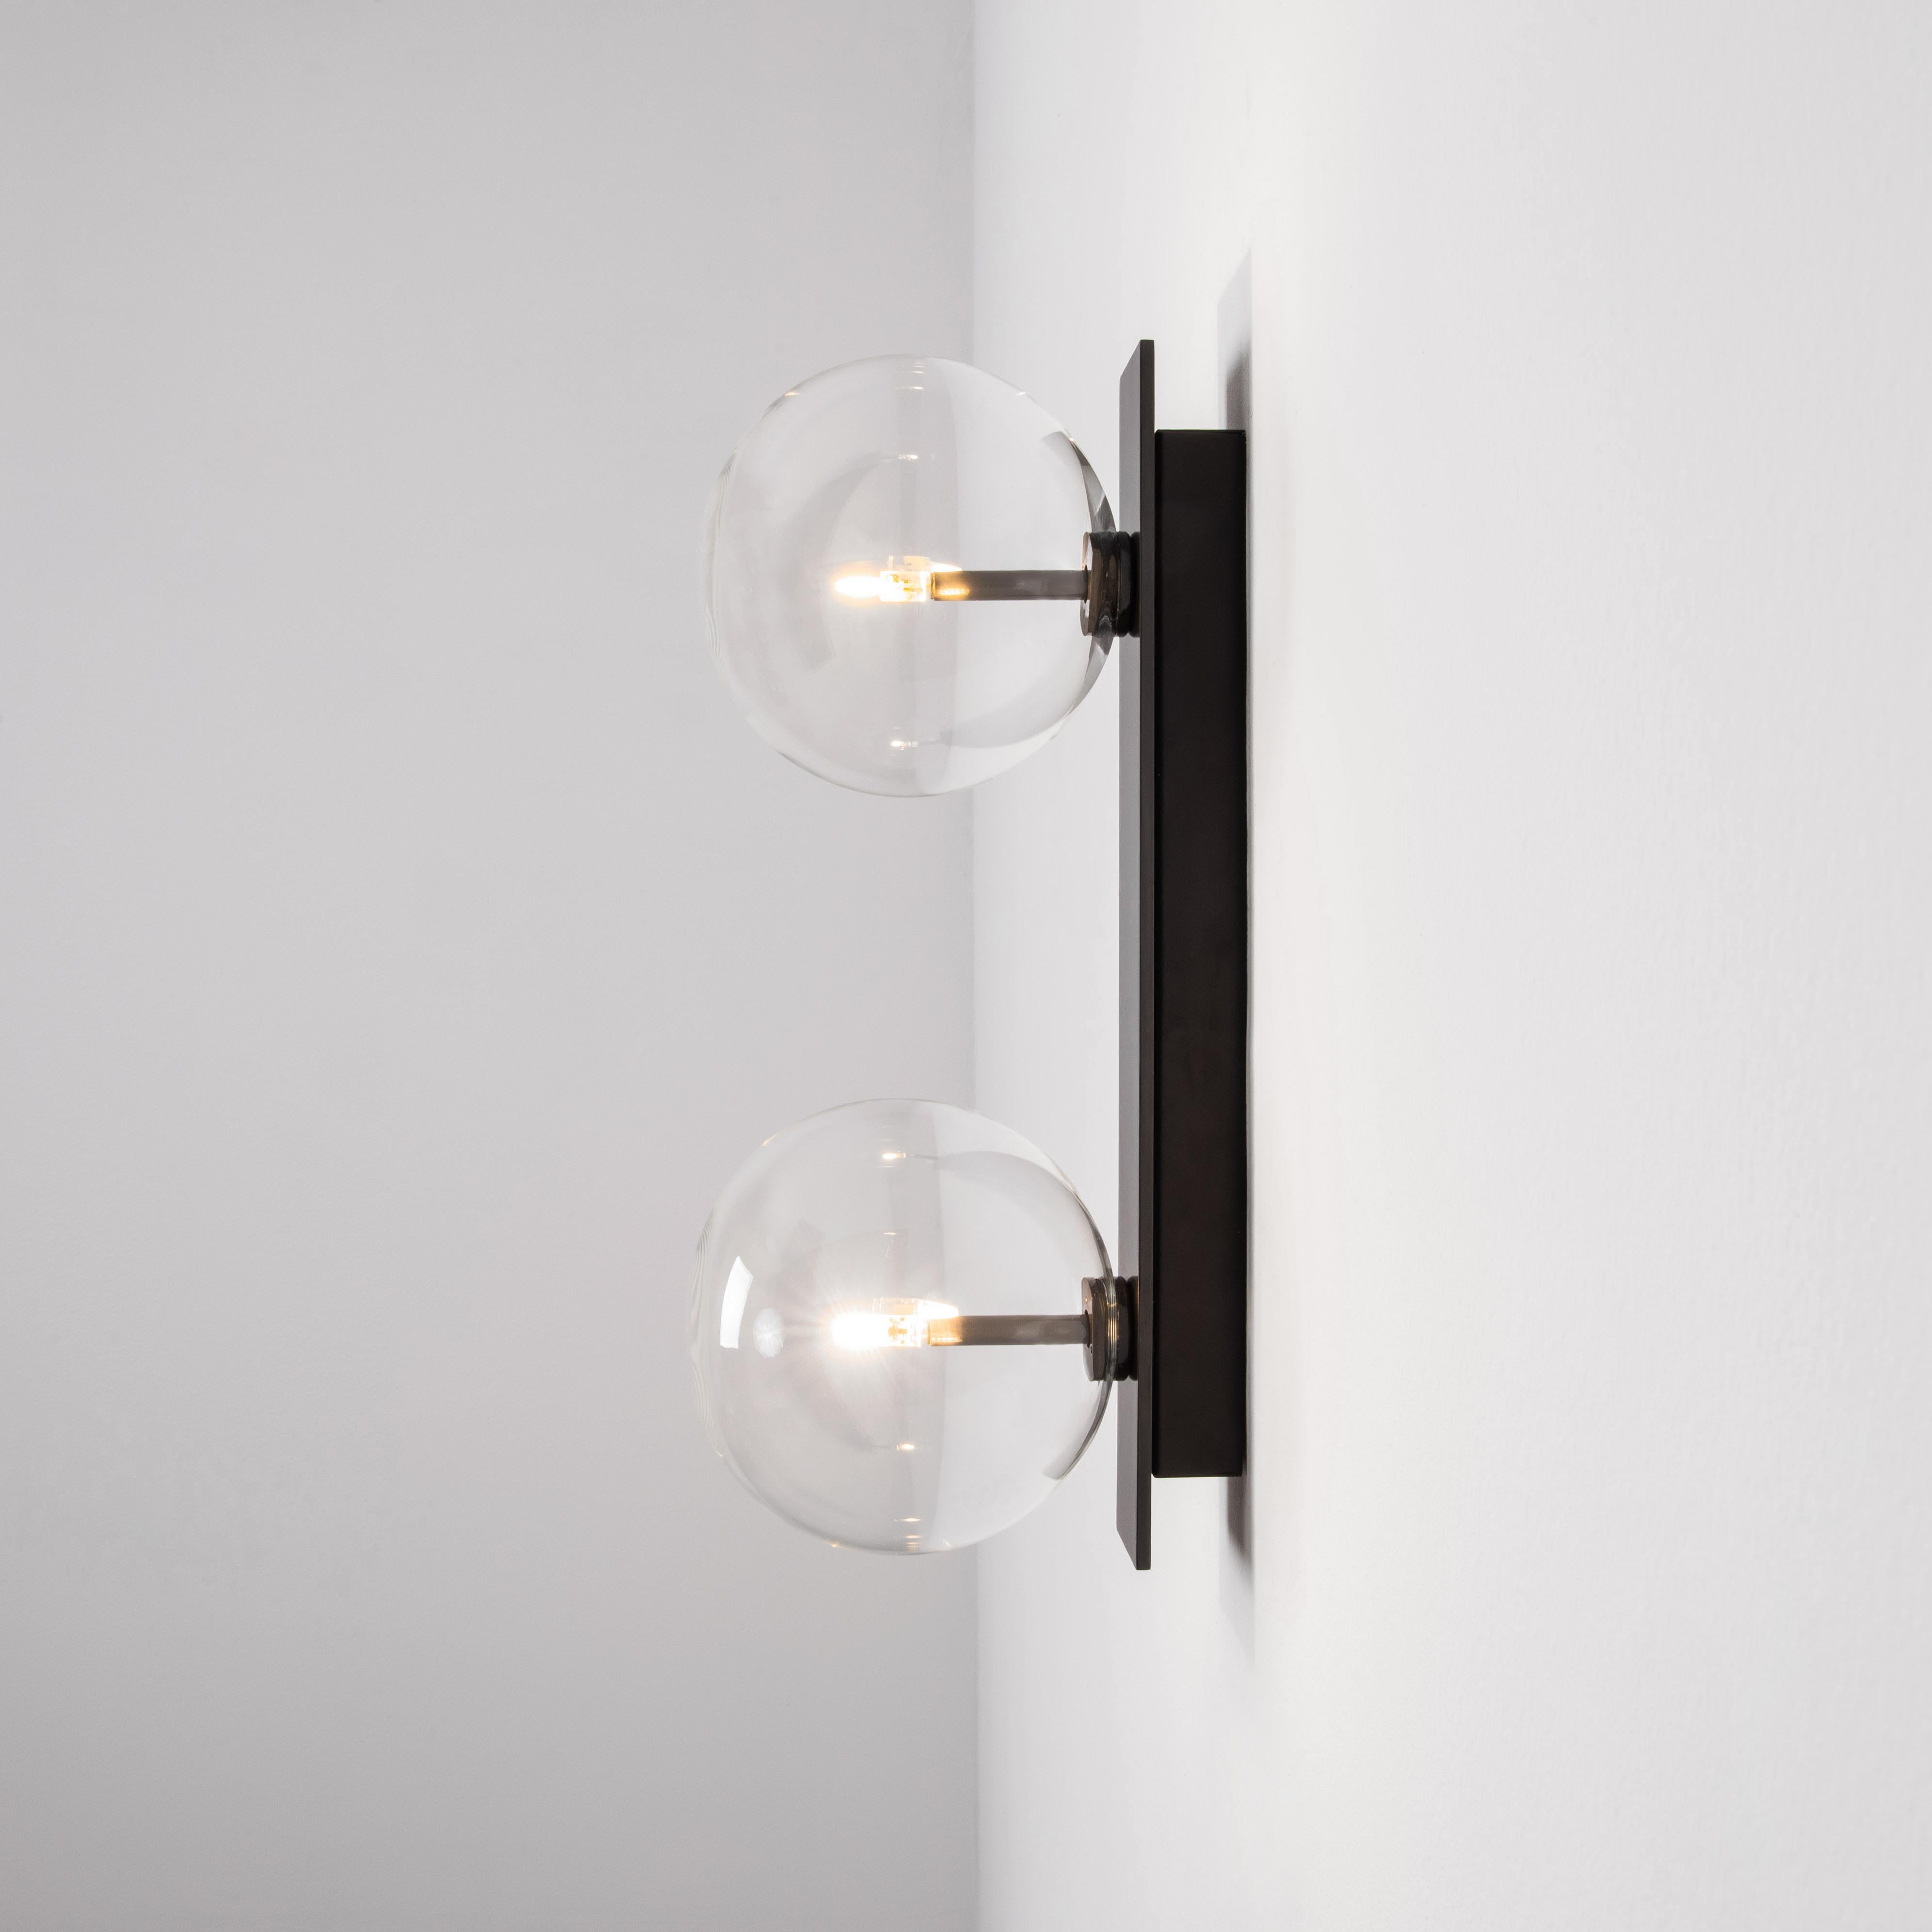 Oslo Dual wall sconce by Schwung
Dimensions: W 15 x D 19 x H 40 cm
Materials: Black gunmetal, hand blown glass globes

Finishes available: Black gunmetal, polished nickel, brass
 

Schwung is a German word, and loosely defined, means energy